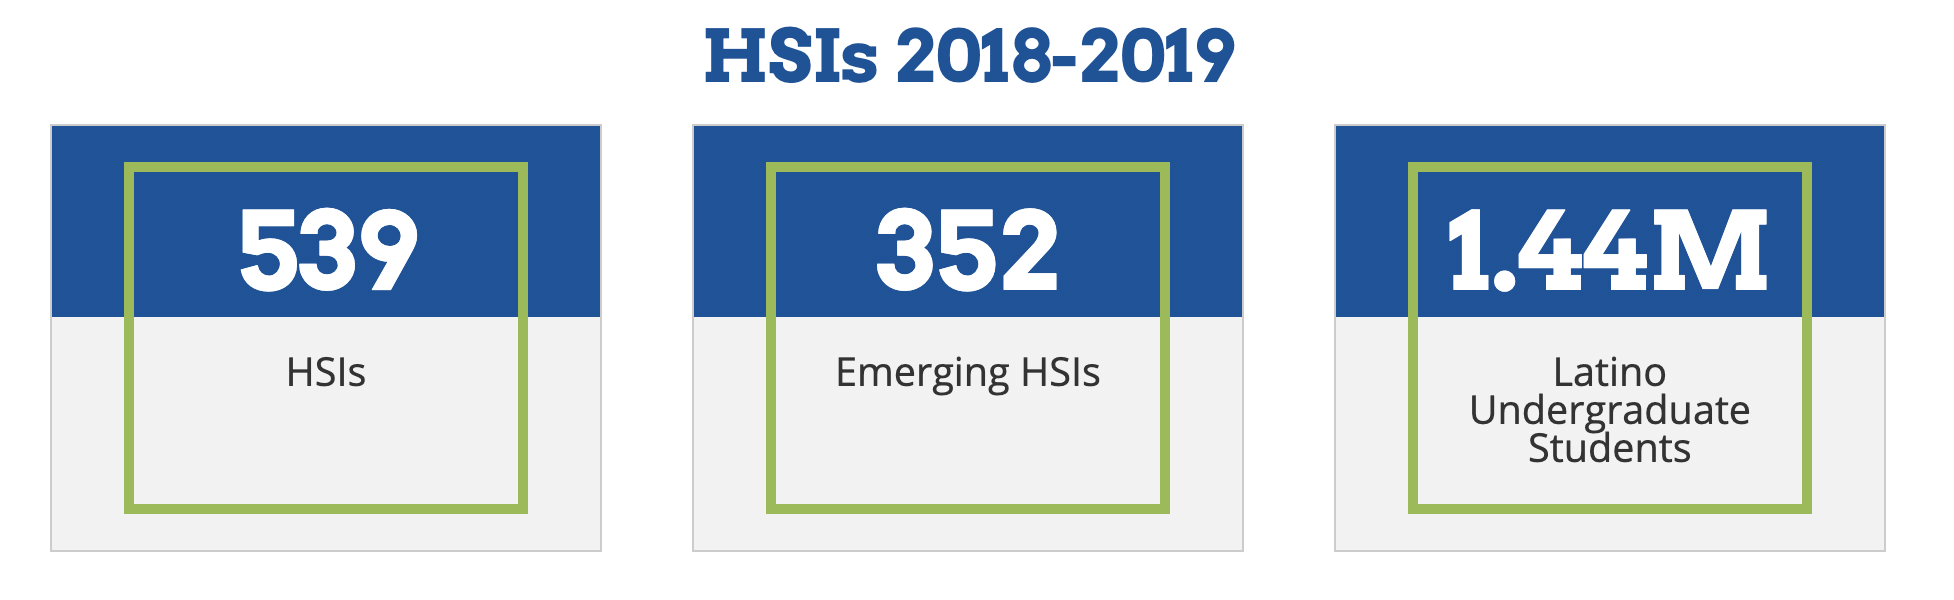 Hispanic-Serving Institutions (HSIs) 2018-2019 Stats